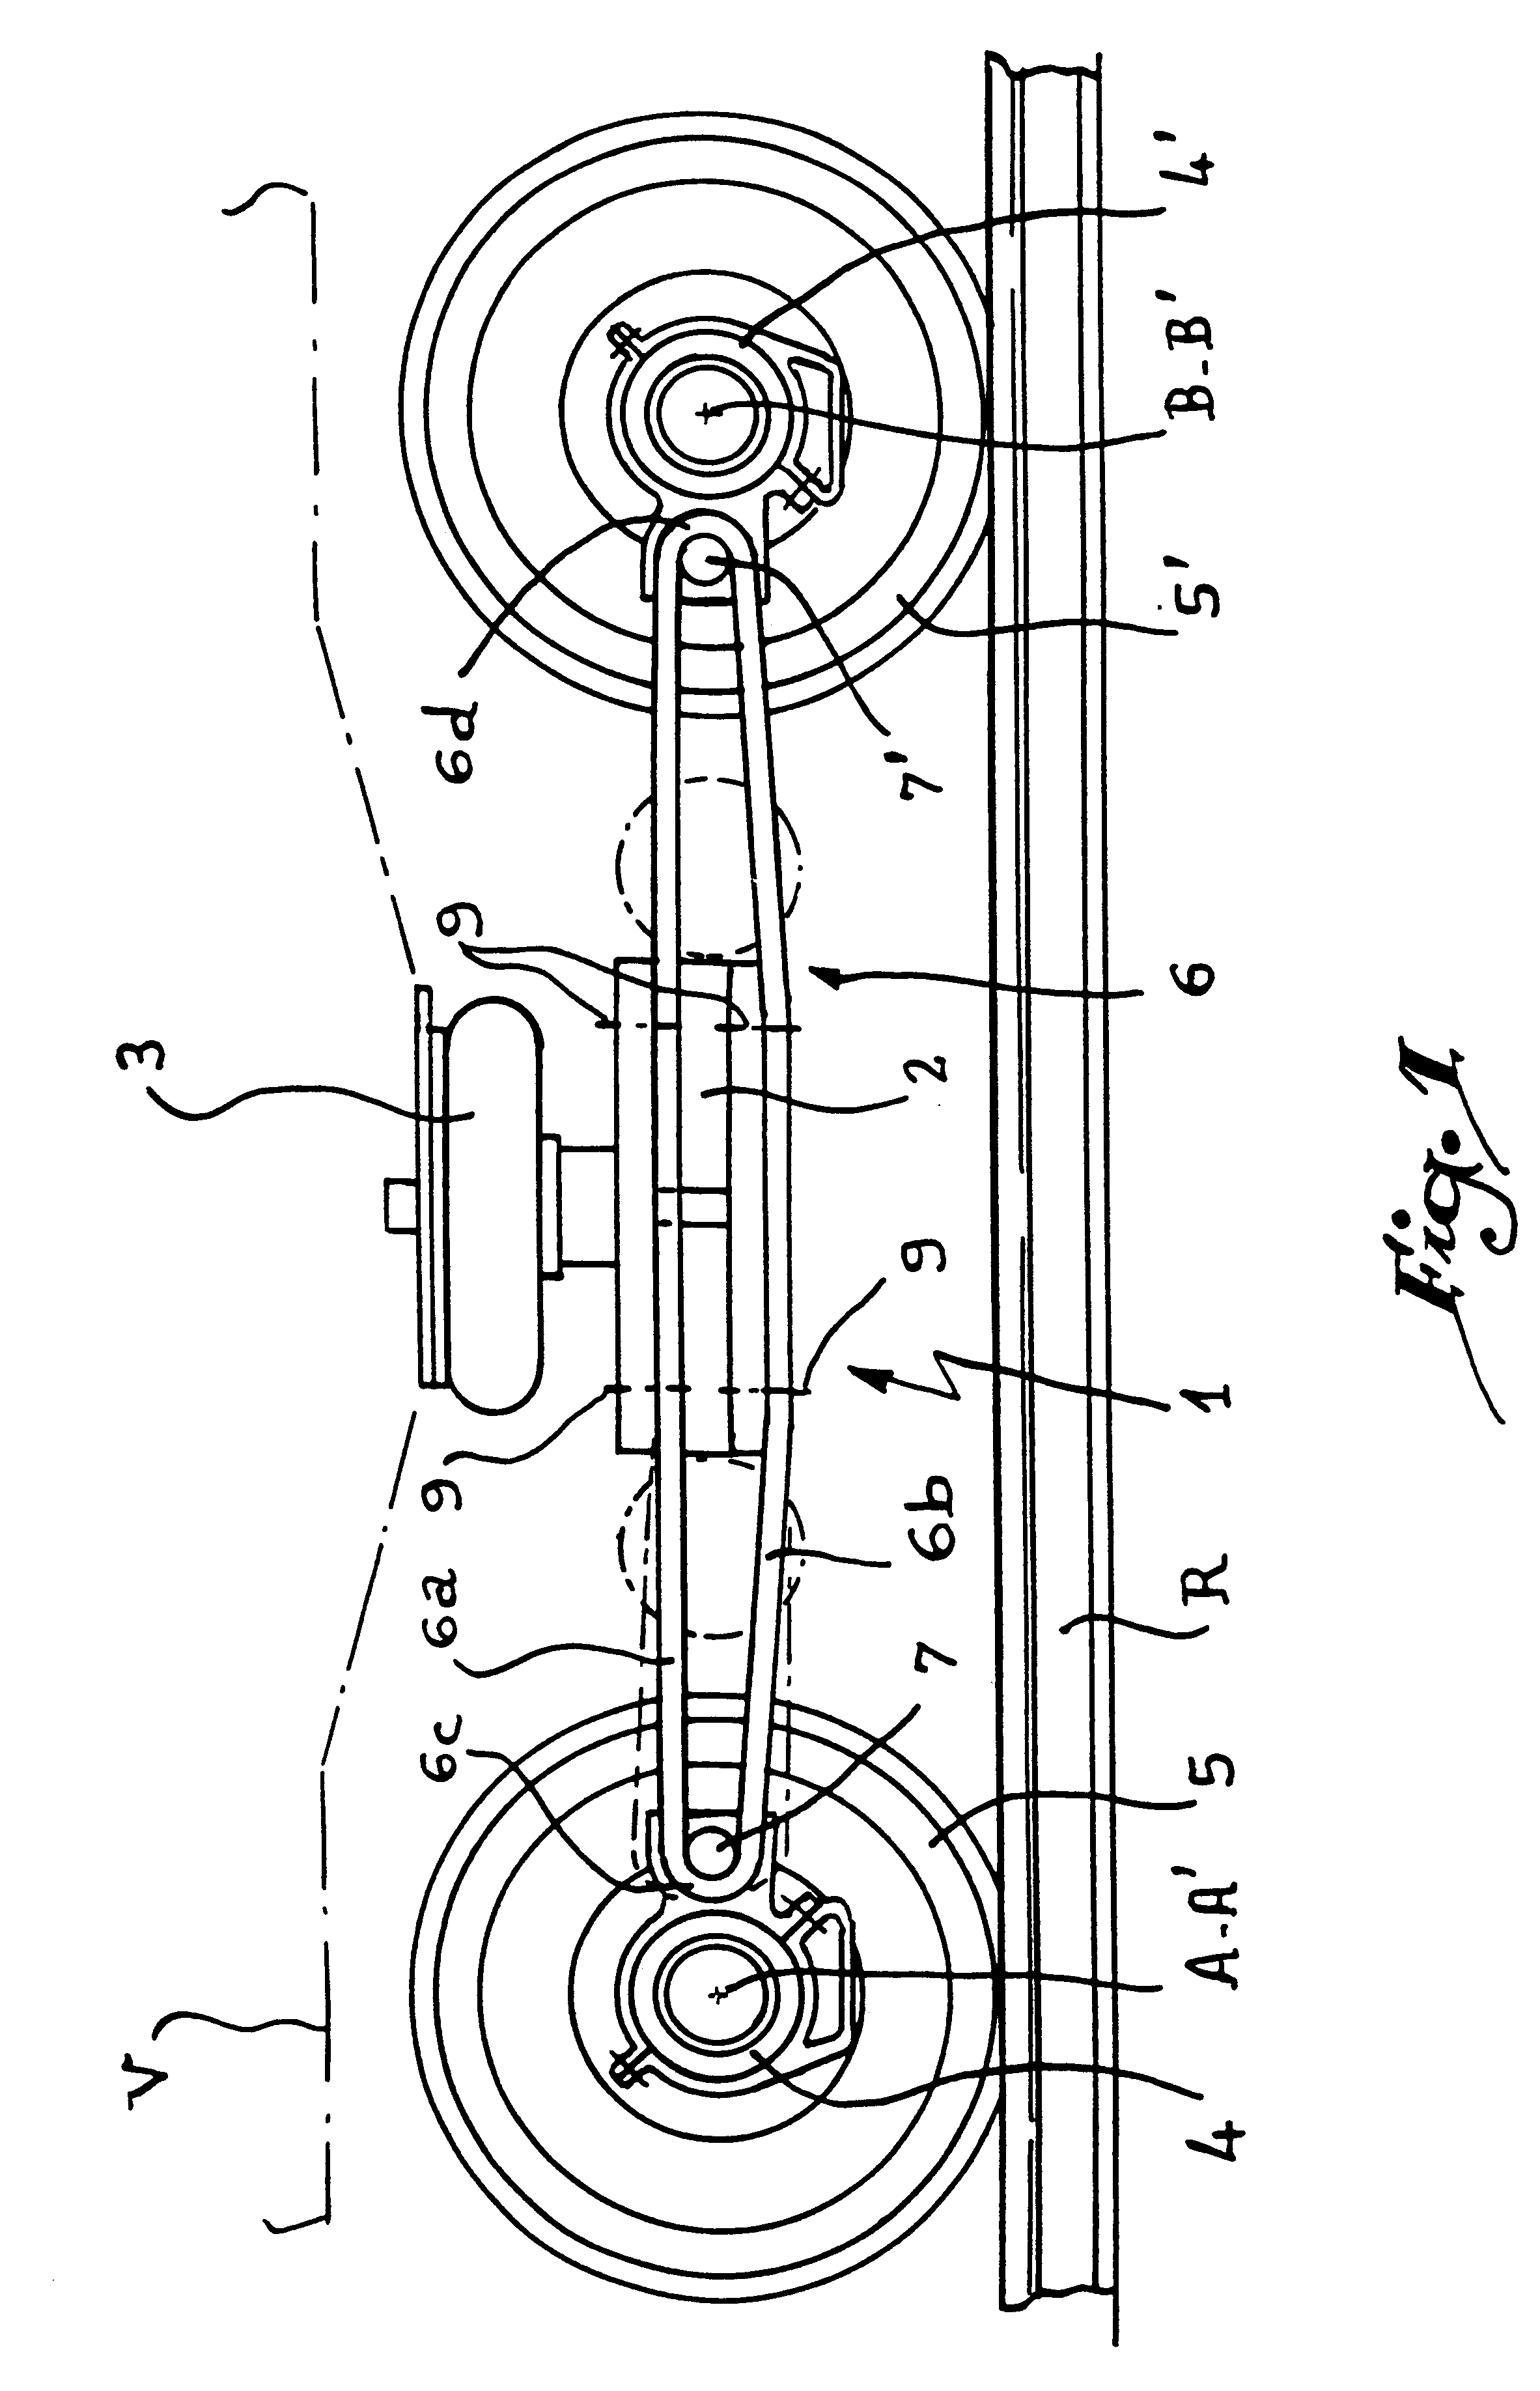 Railway vehicle bogie and process for manufacturing a side member of such a bogie